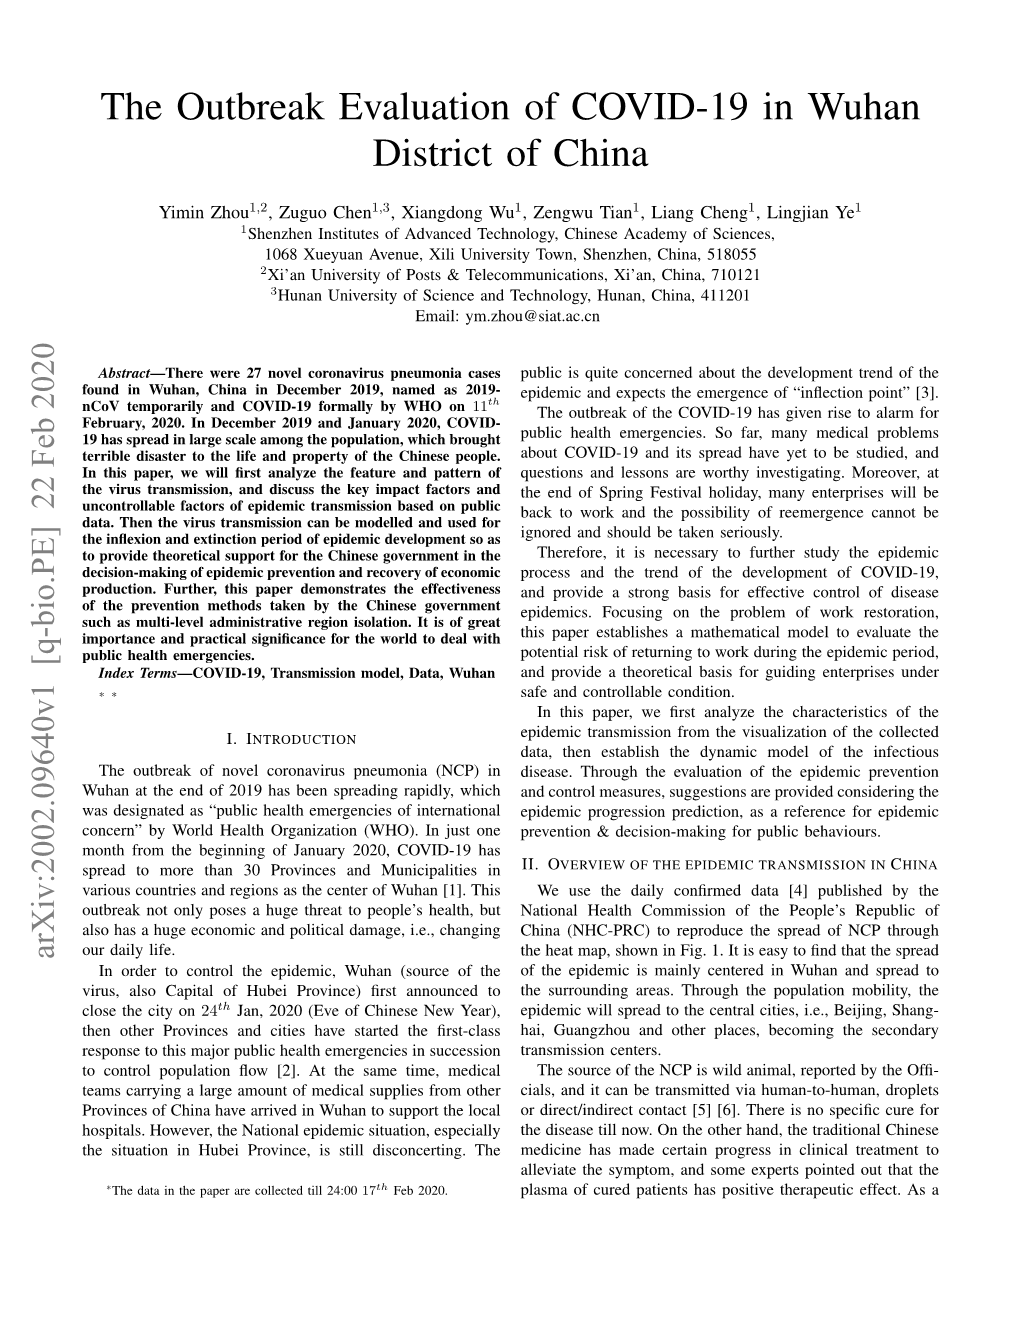 The Outbreak Evaluation of COVID-19 in Wuhan District of China